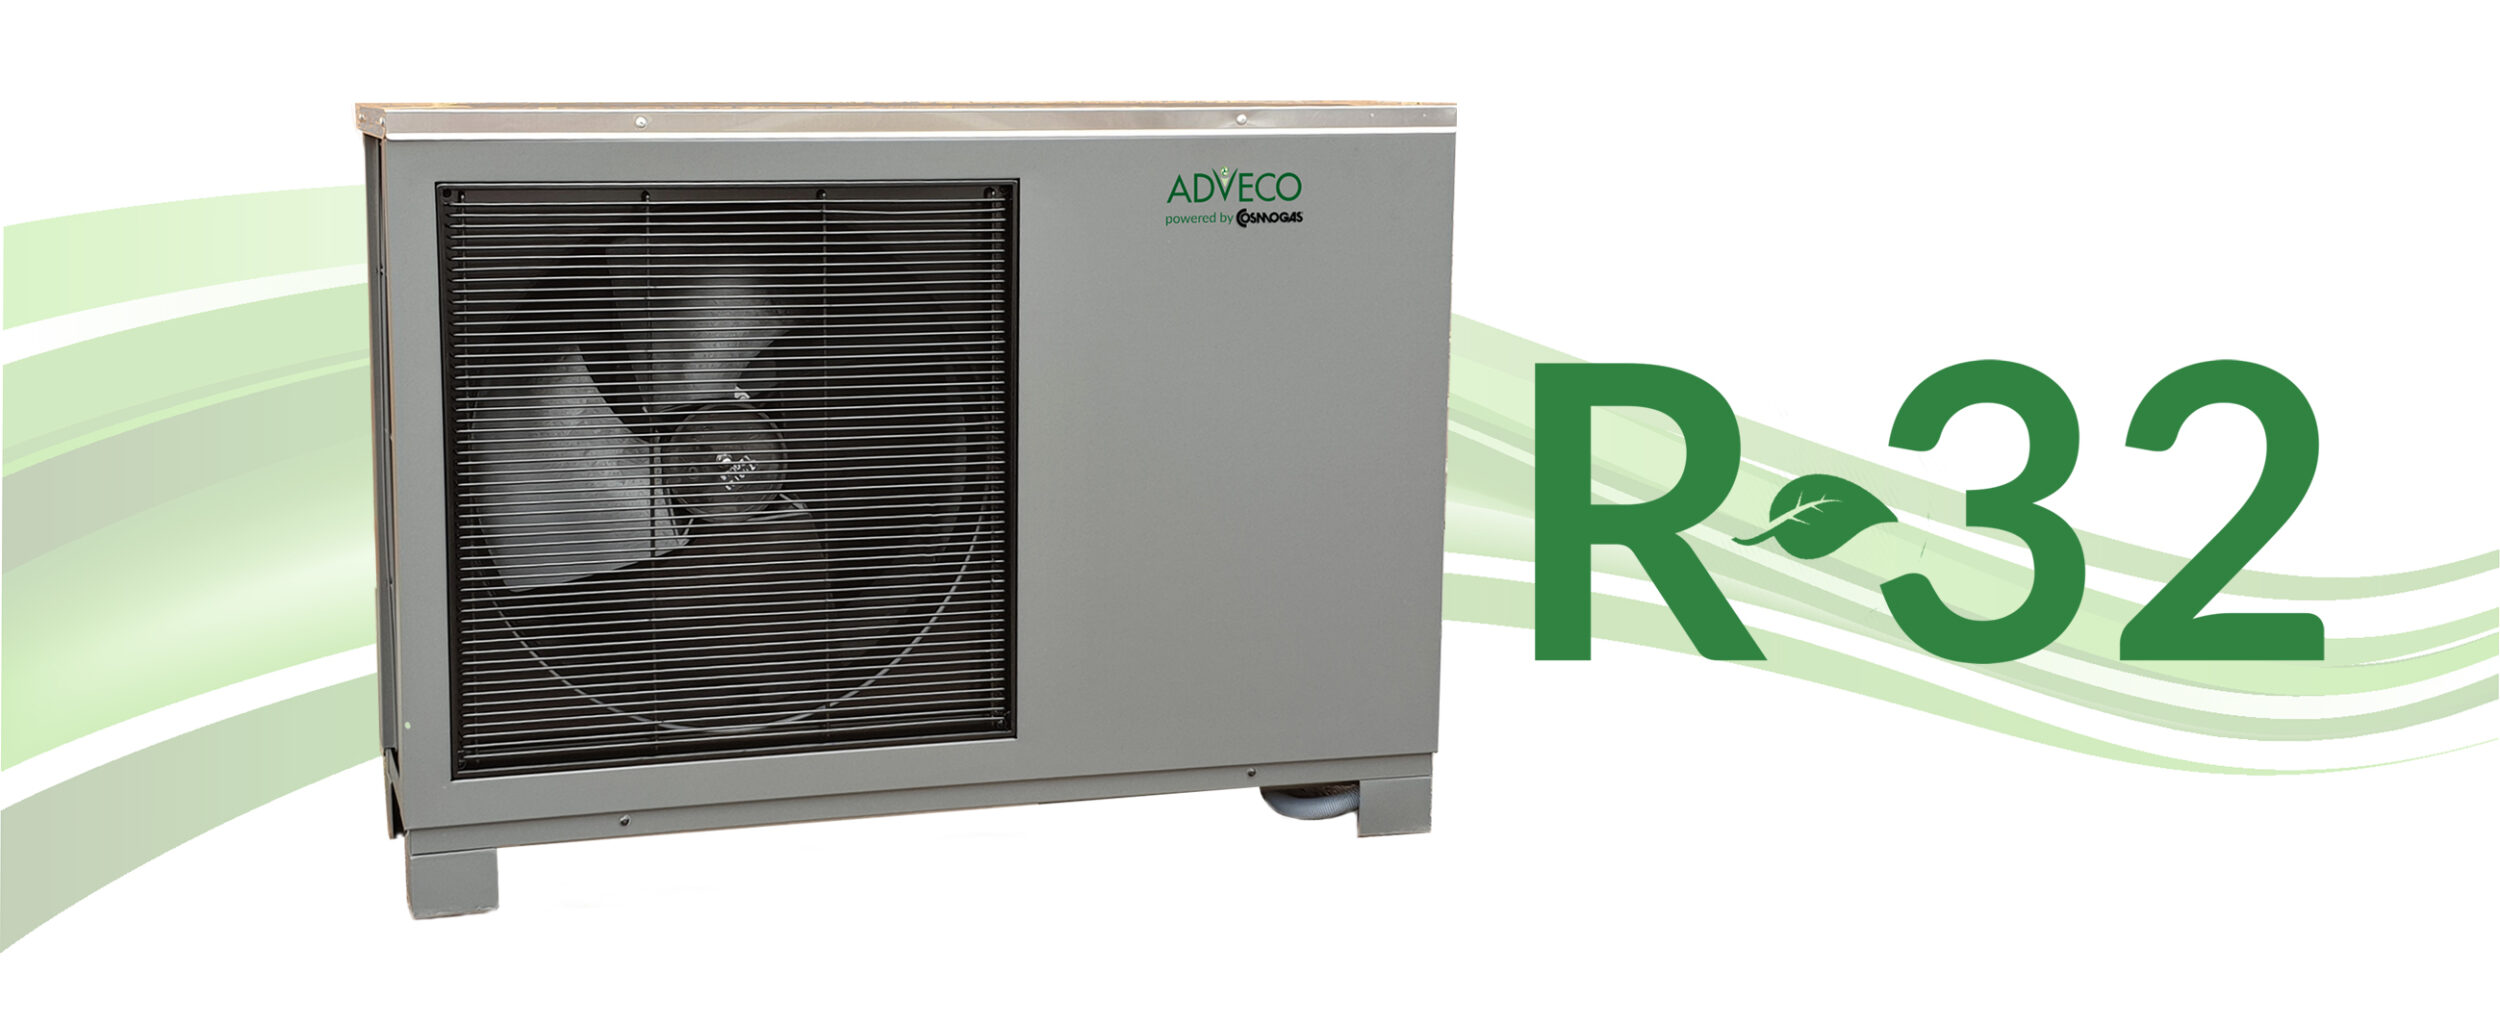 Adveco Reduces the Global Warming Potential of FPi Heat Pumps by 80%